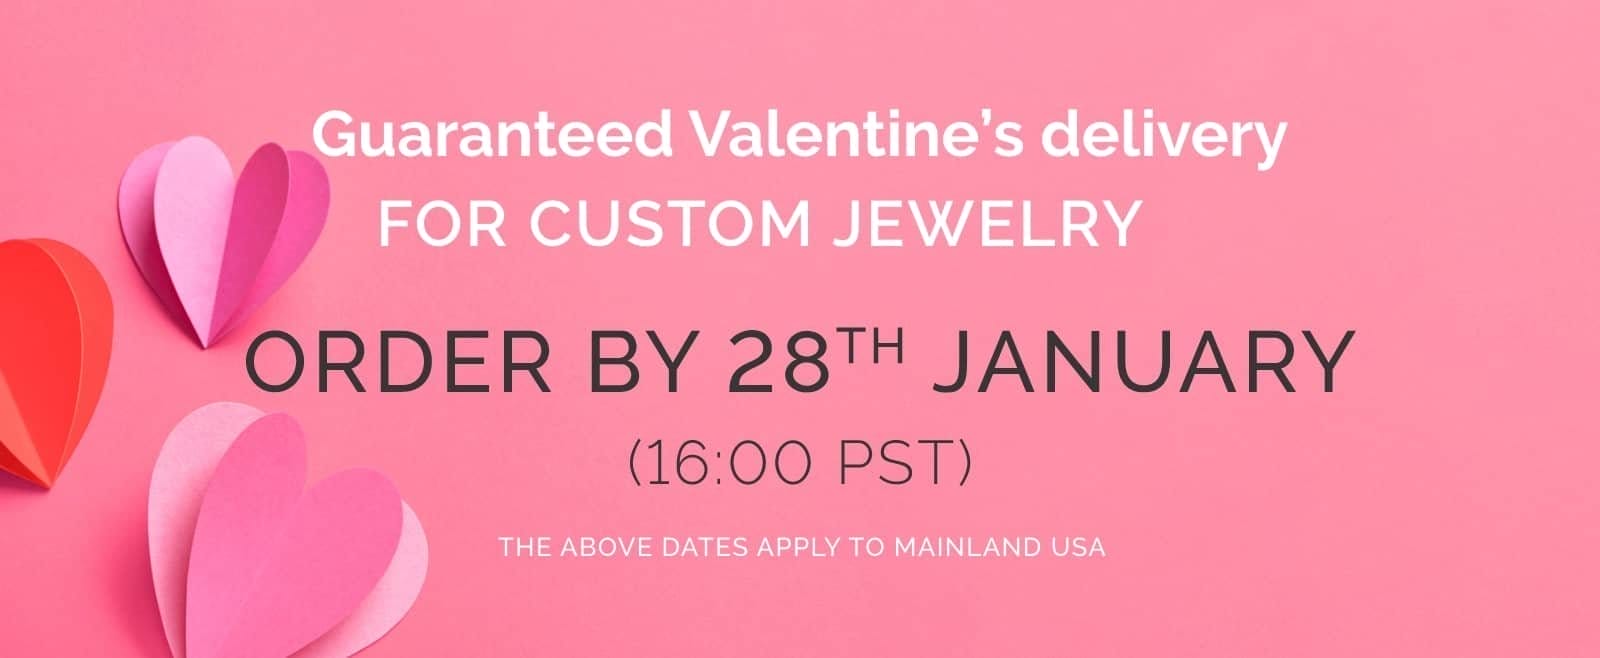 order by 29th January for custom jewellery